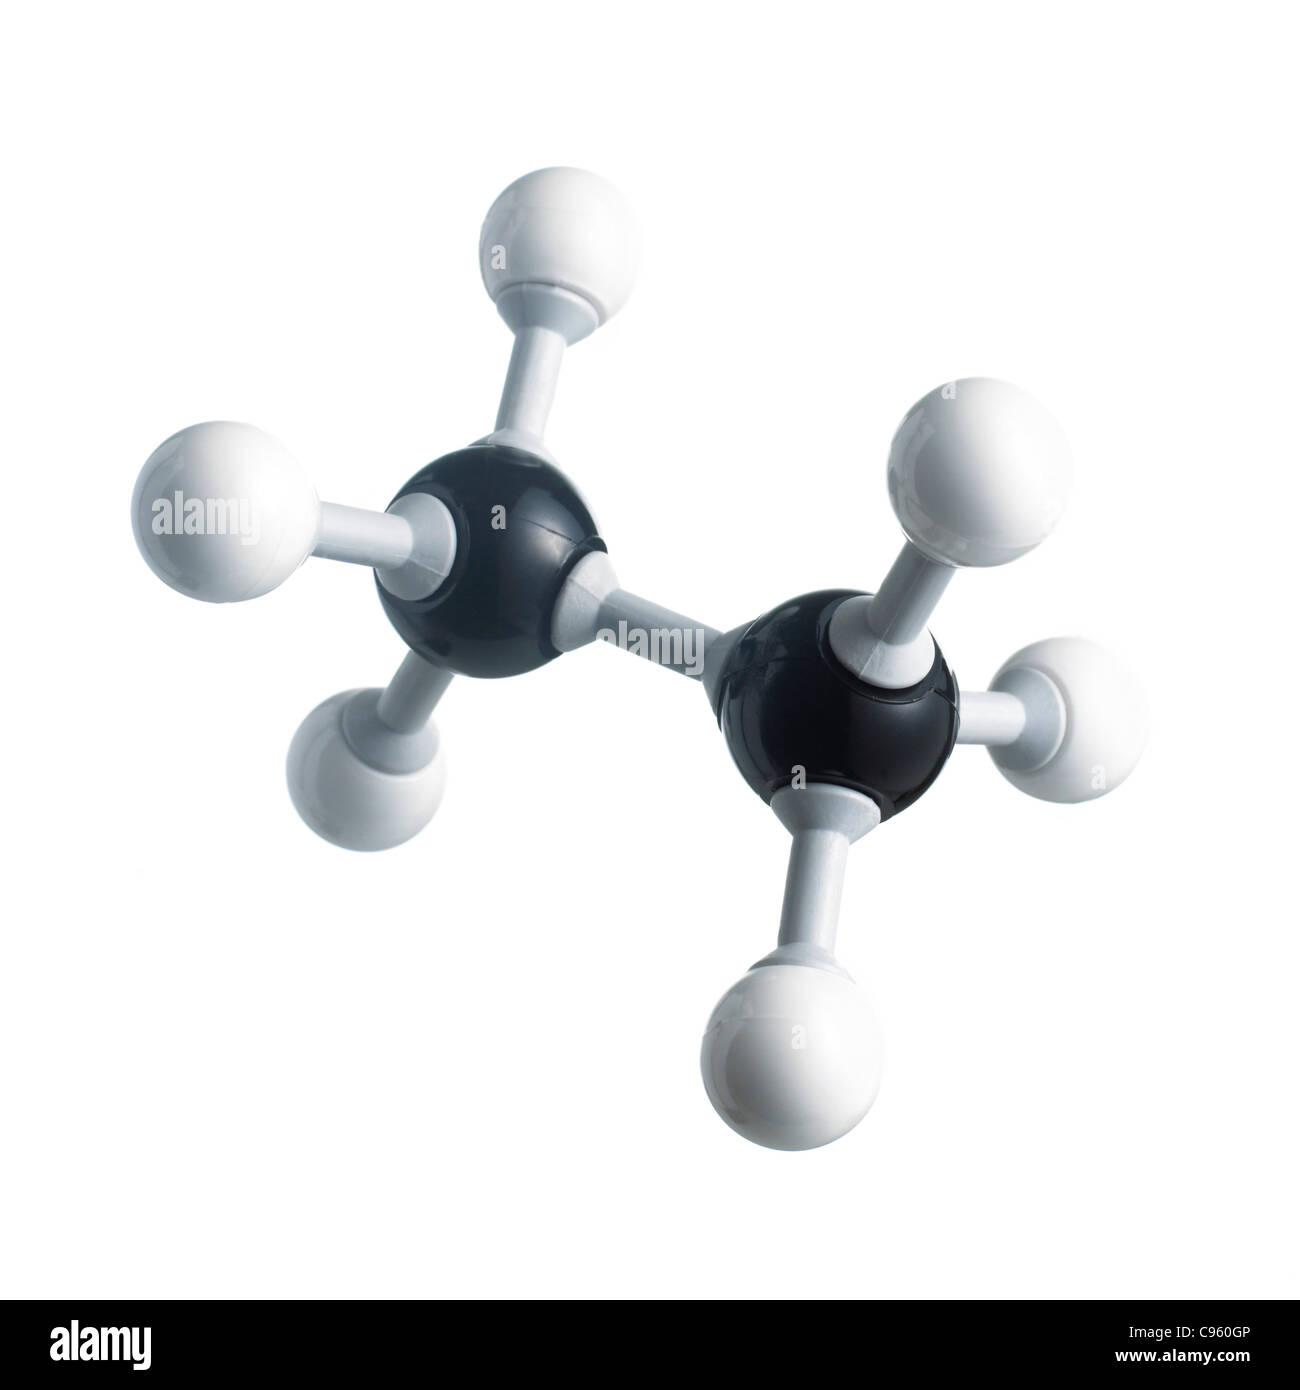 Ethane molecule. Atoms are represented as spheres and are colour-coded ...